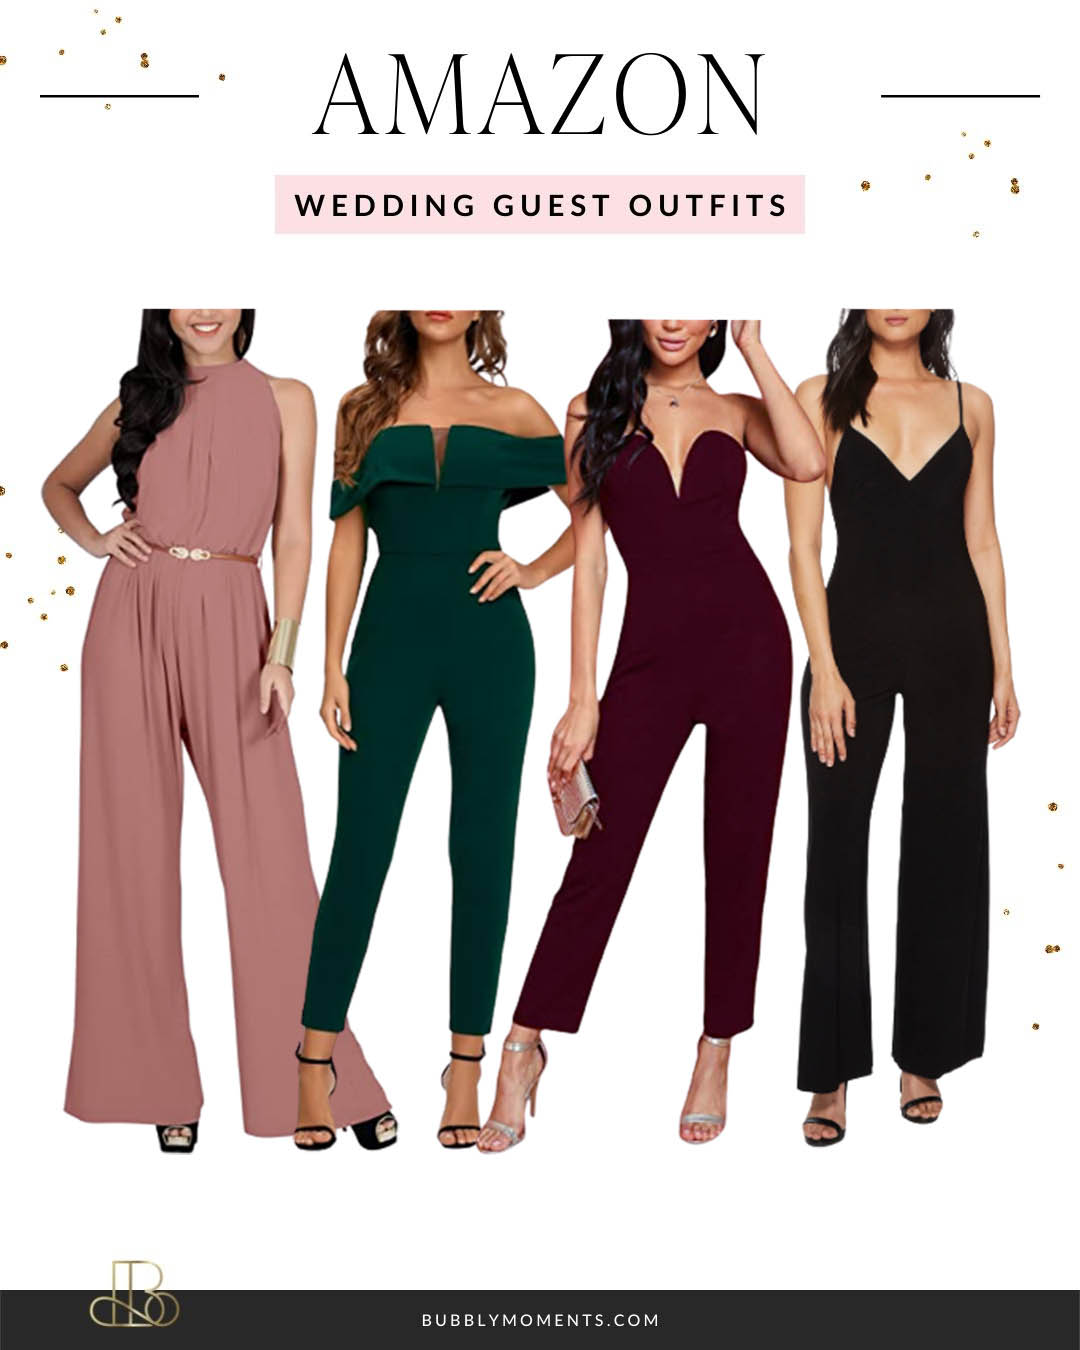 Fall Wedding Outfit Ideas for Every Dress Code | Formal Fall Wedding Outfit Ideas | Semiformal Wedding Guest Outfit | Bubbly Moments